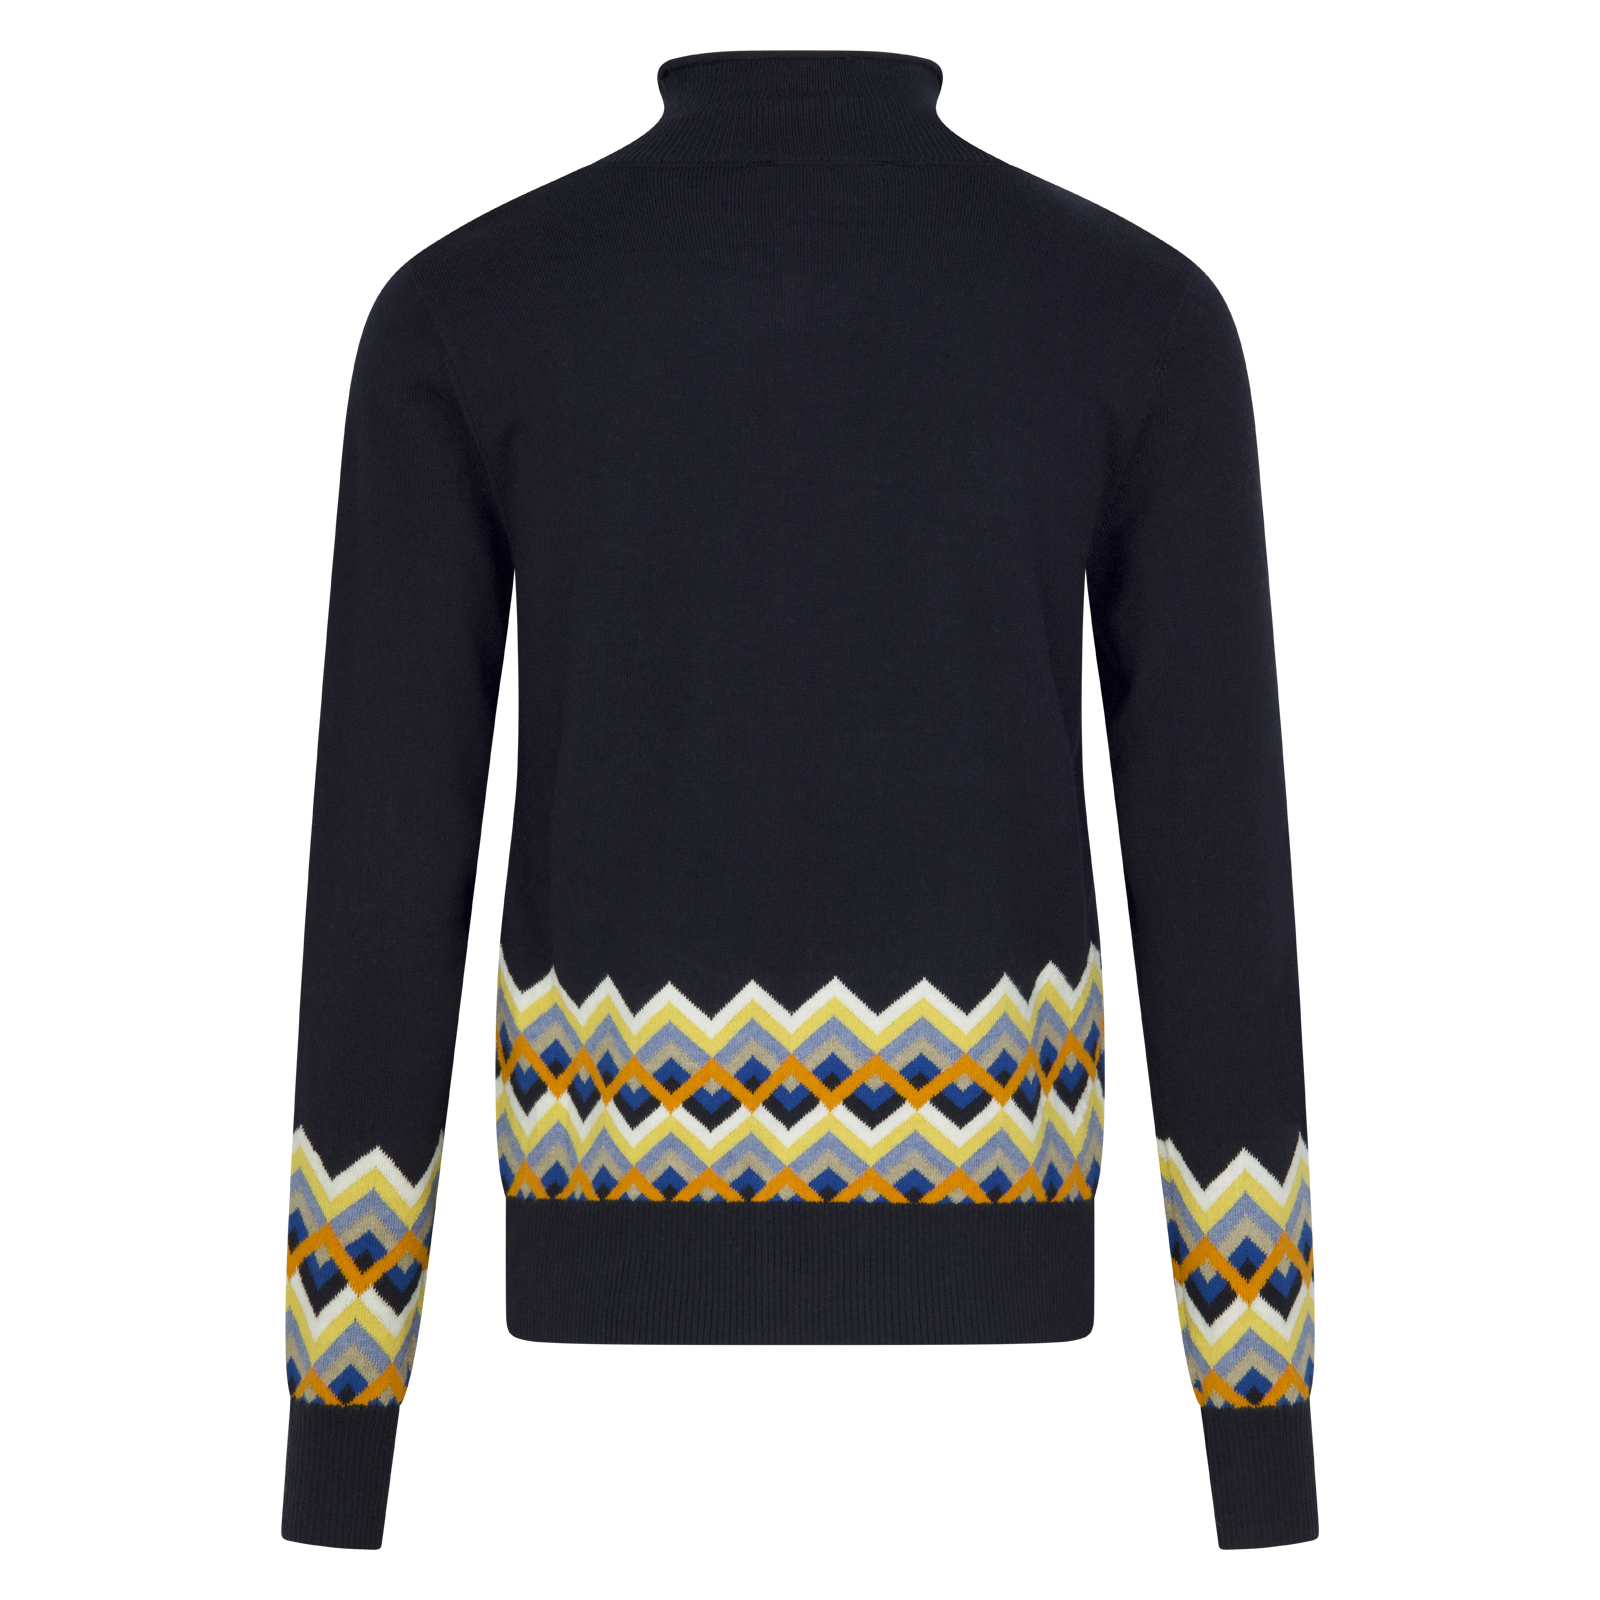 Ladies' knitted golf sweater in sustainable cotton with cashmere